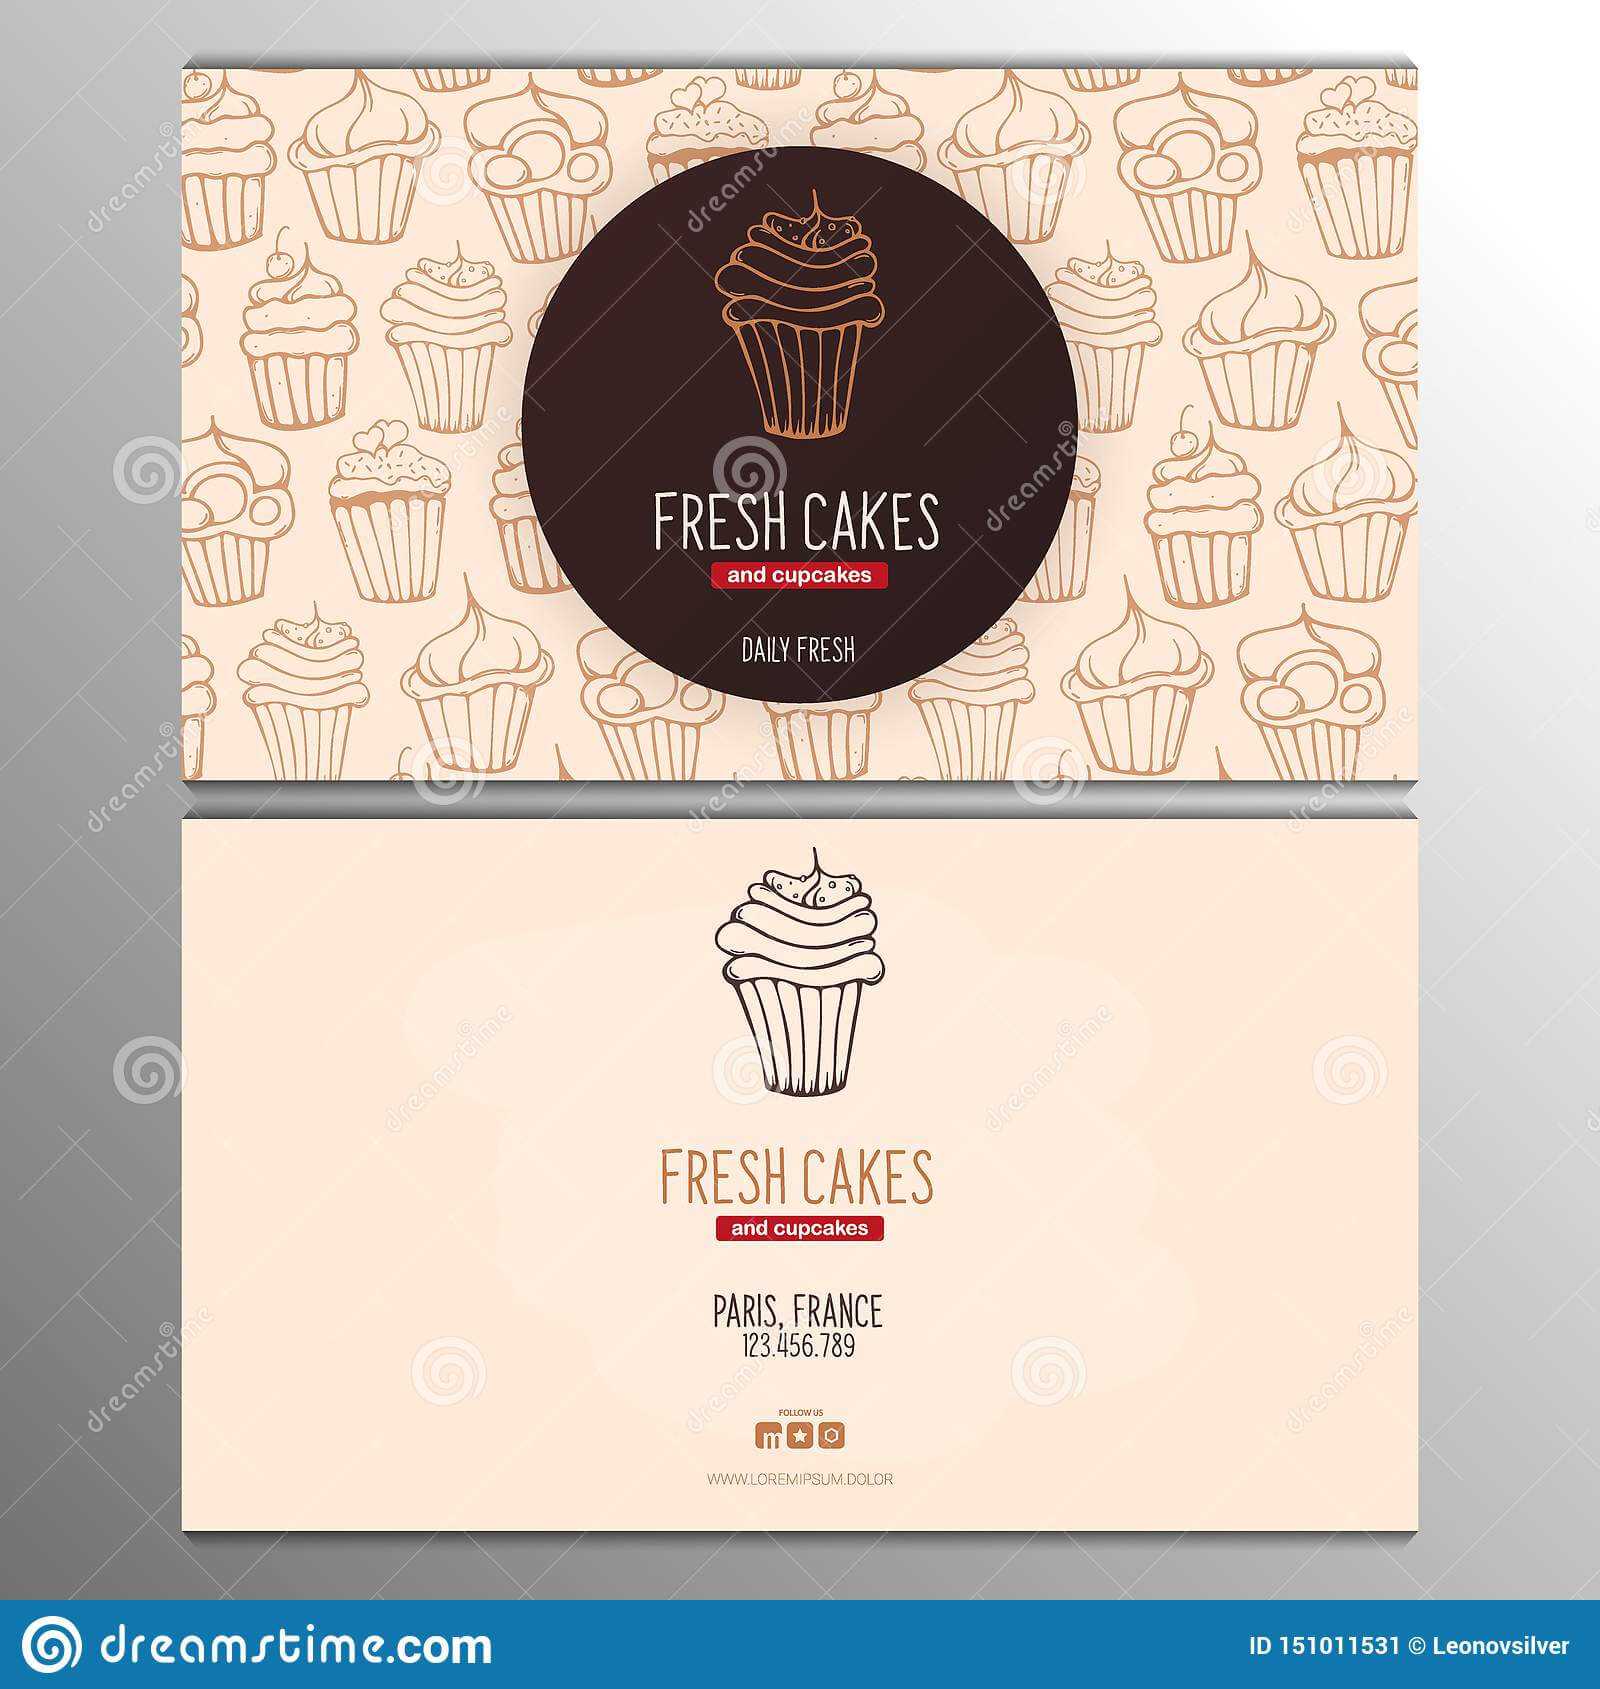 Cupcake Or Cake Business Card Template For Bakery Or Pastry Throughout Cake Business Cards Templates Free